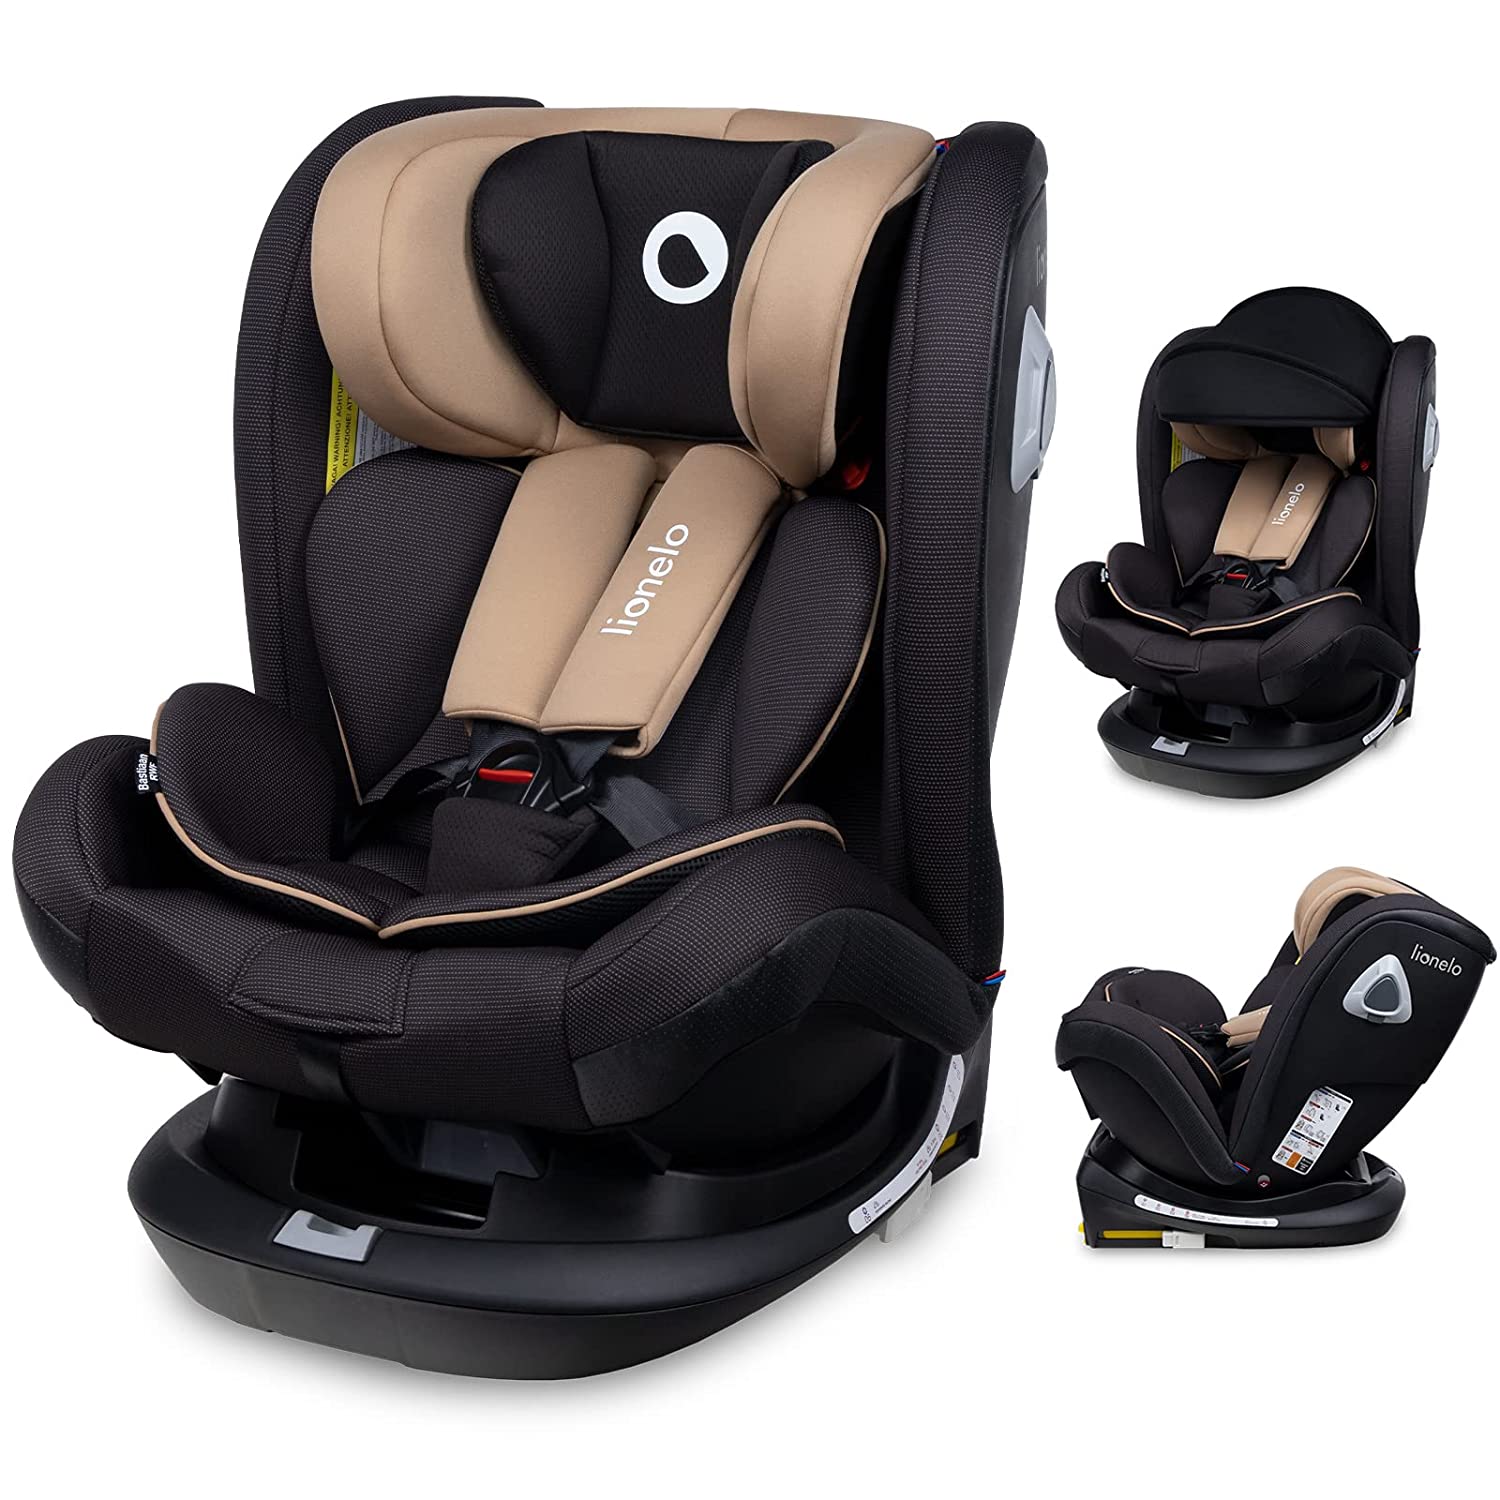 LIONELO Bastiaan RWF Child Seat, Isofix, Child Seat Rotatable 360 Degrees, Top Tether, from Birth to 36 kg, Extended in and against the direction of travel, Side Protection, Seat Reducer